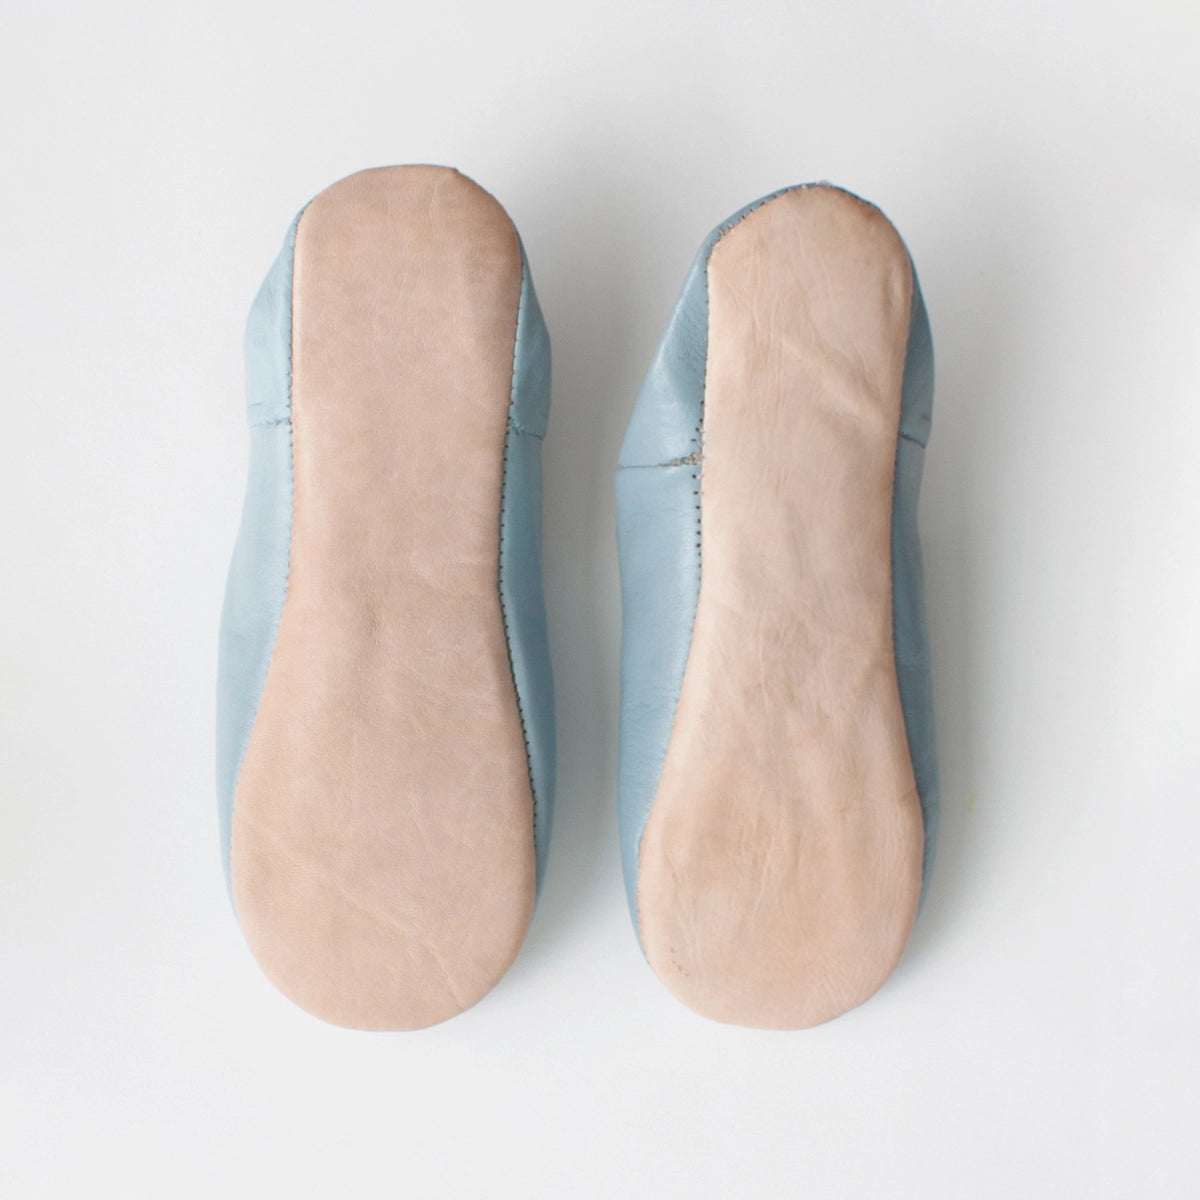 Moroccan Babouche Basic Slippers, Pearl Gray